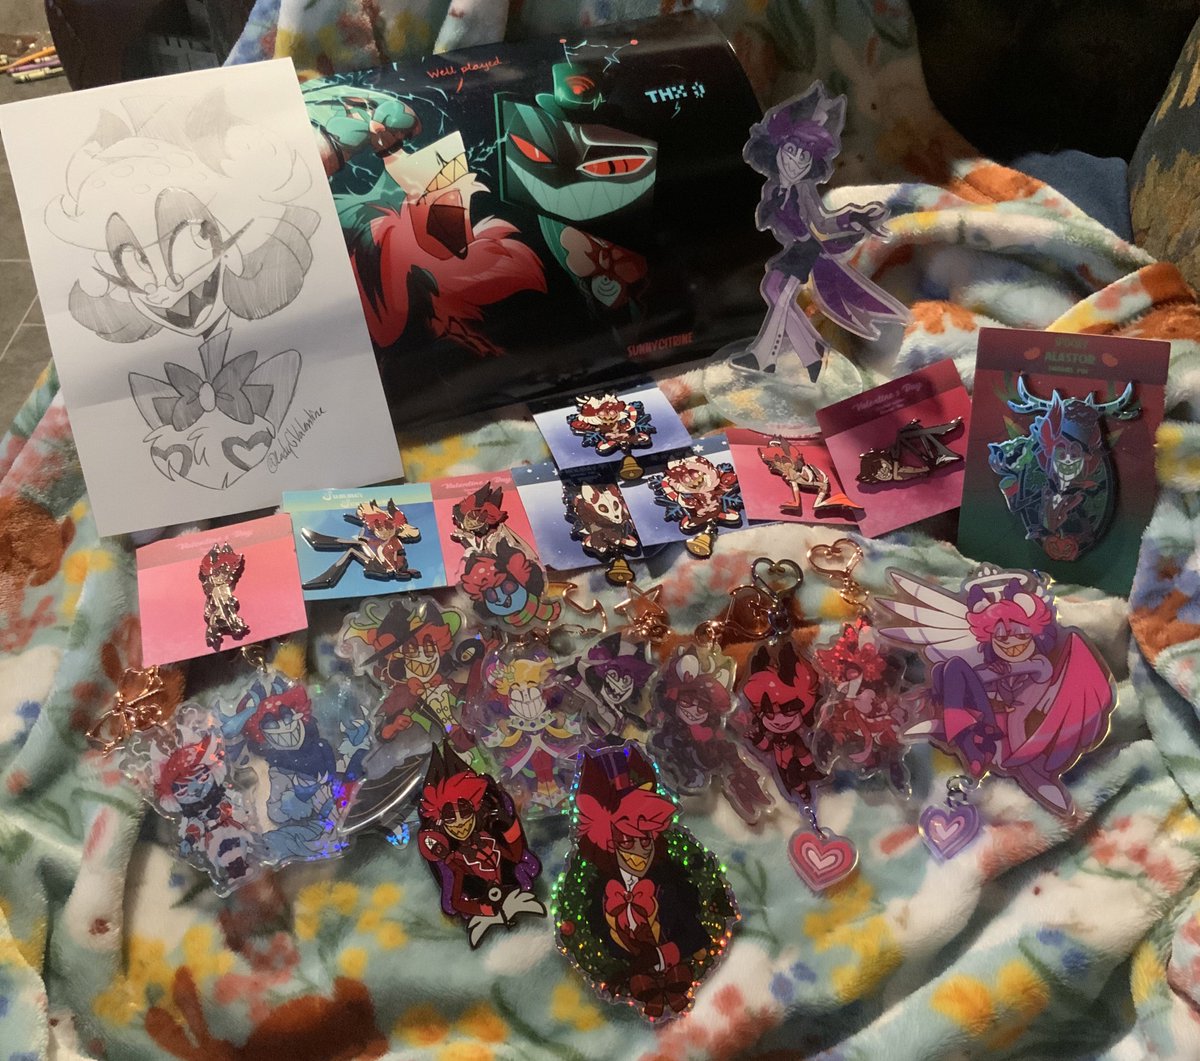 I literally started crying as I was taking everything out of the box, then I ugly sobbed from how much Alastor you gifted me @LadyGValentine . I’m gunna make sure I give you and your sister a big gift as well. I’m honestly so grateful you sent me so much. I haven’t smiled-